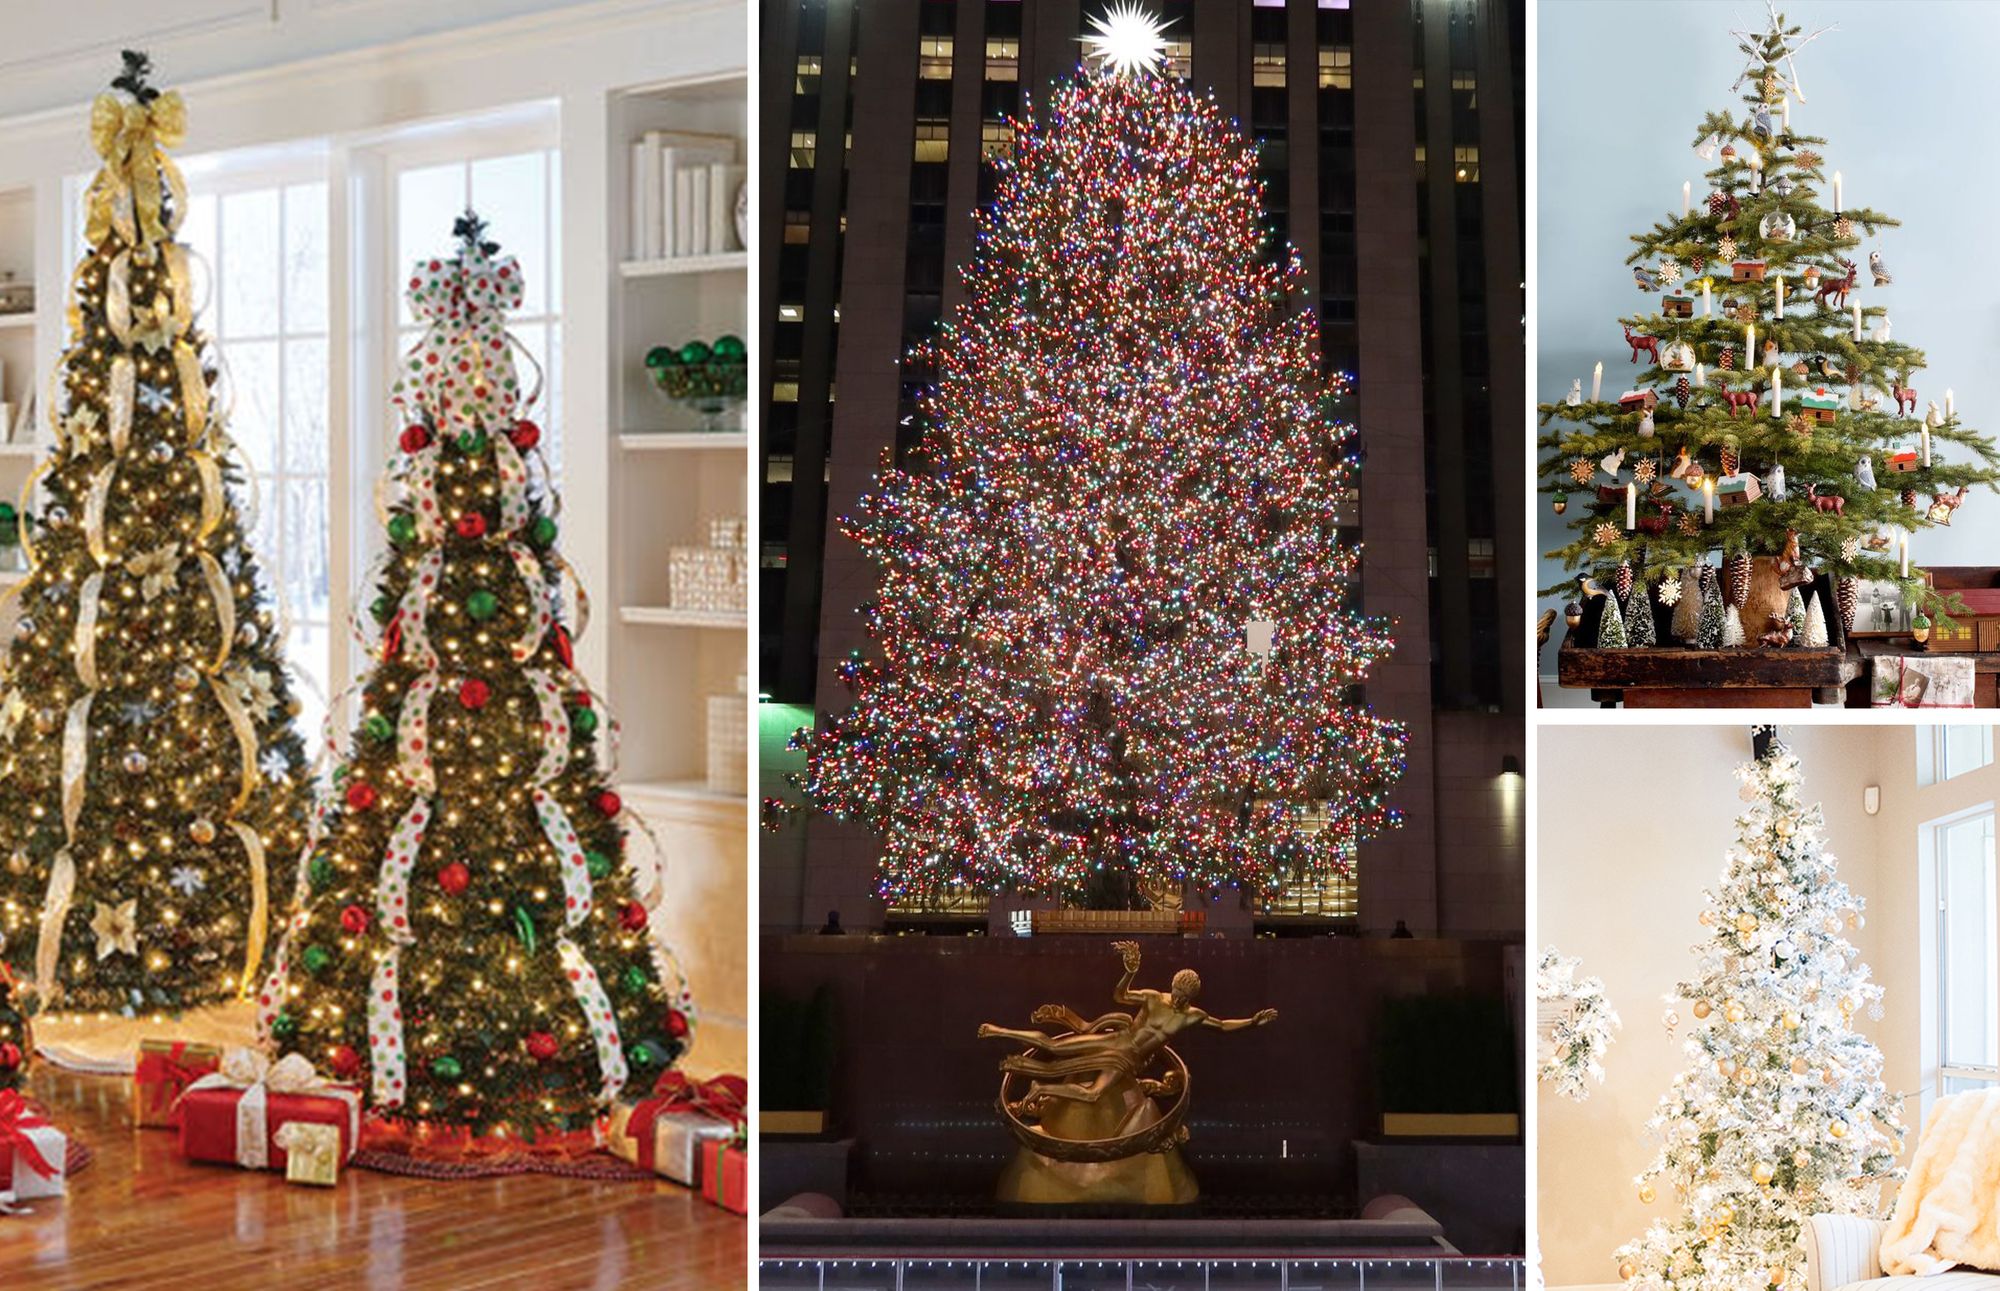 How Did The Tradition Of Christmas Trees Start?